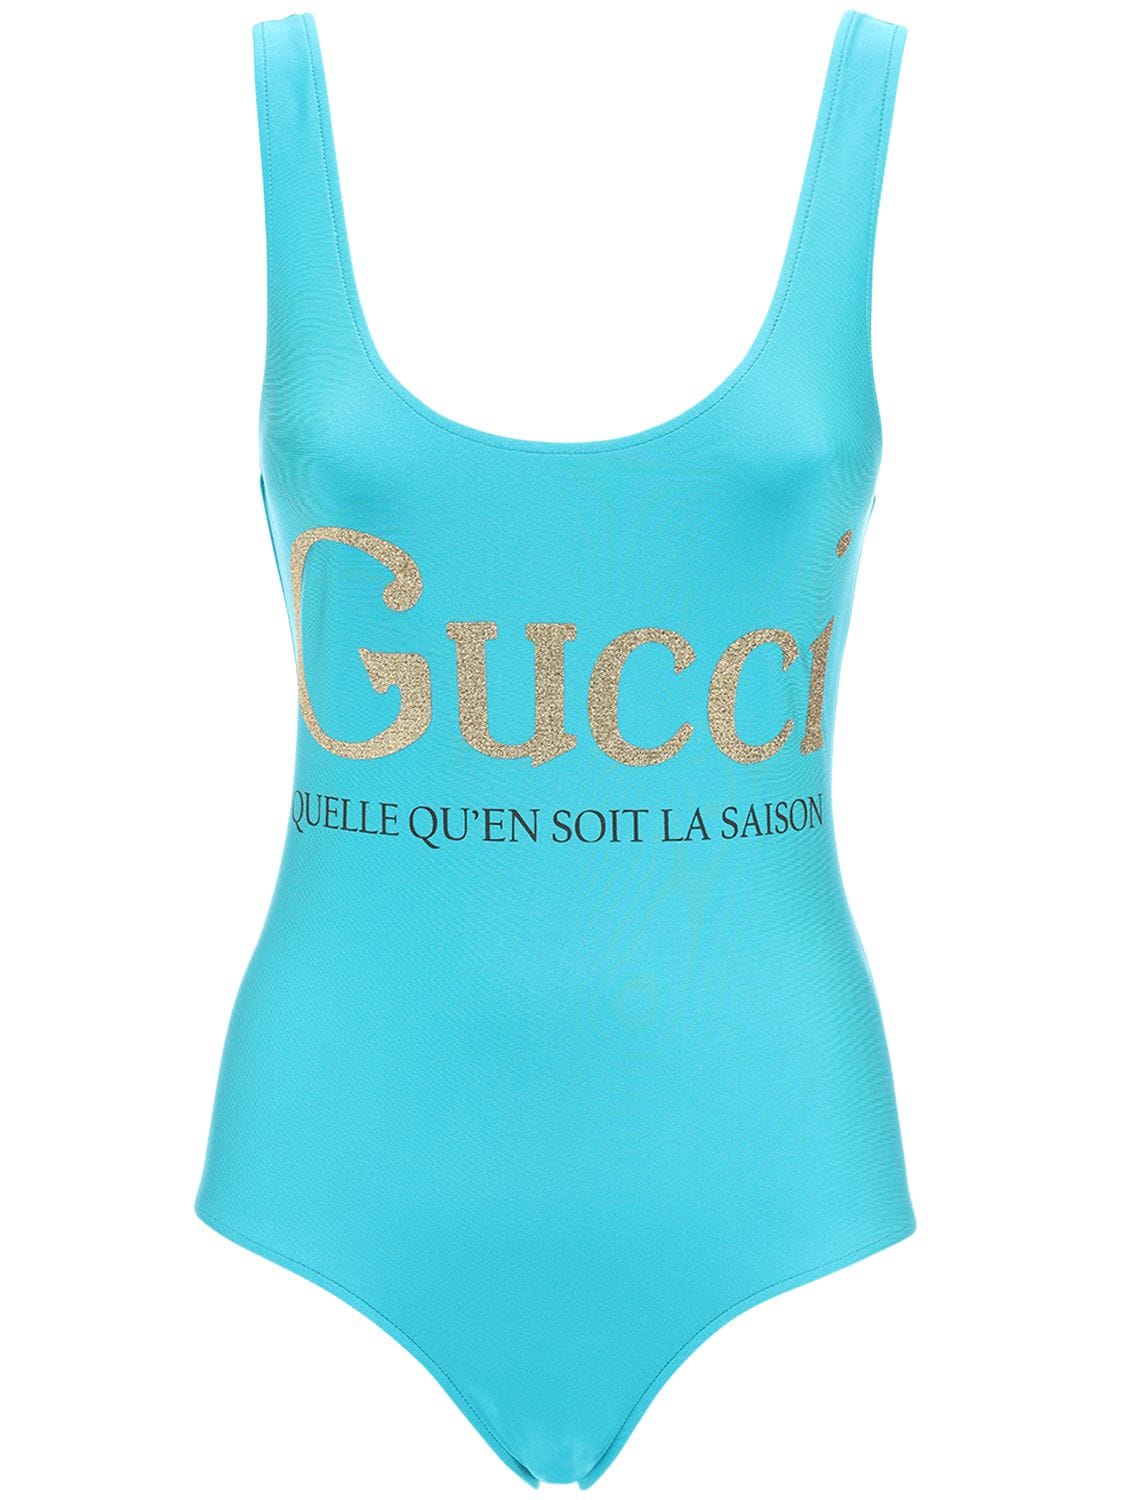 gucci sparkling swimsuit